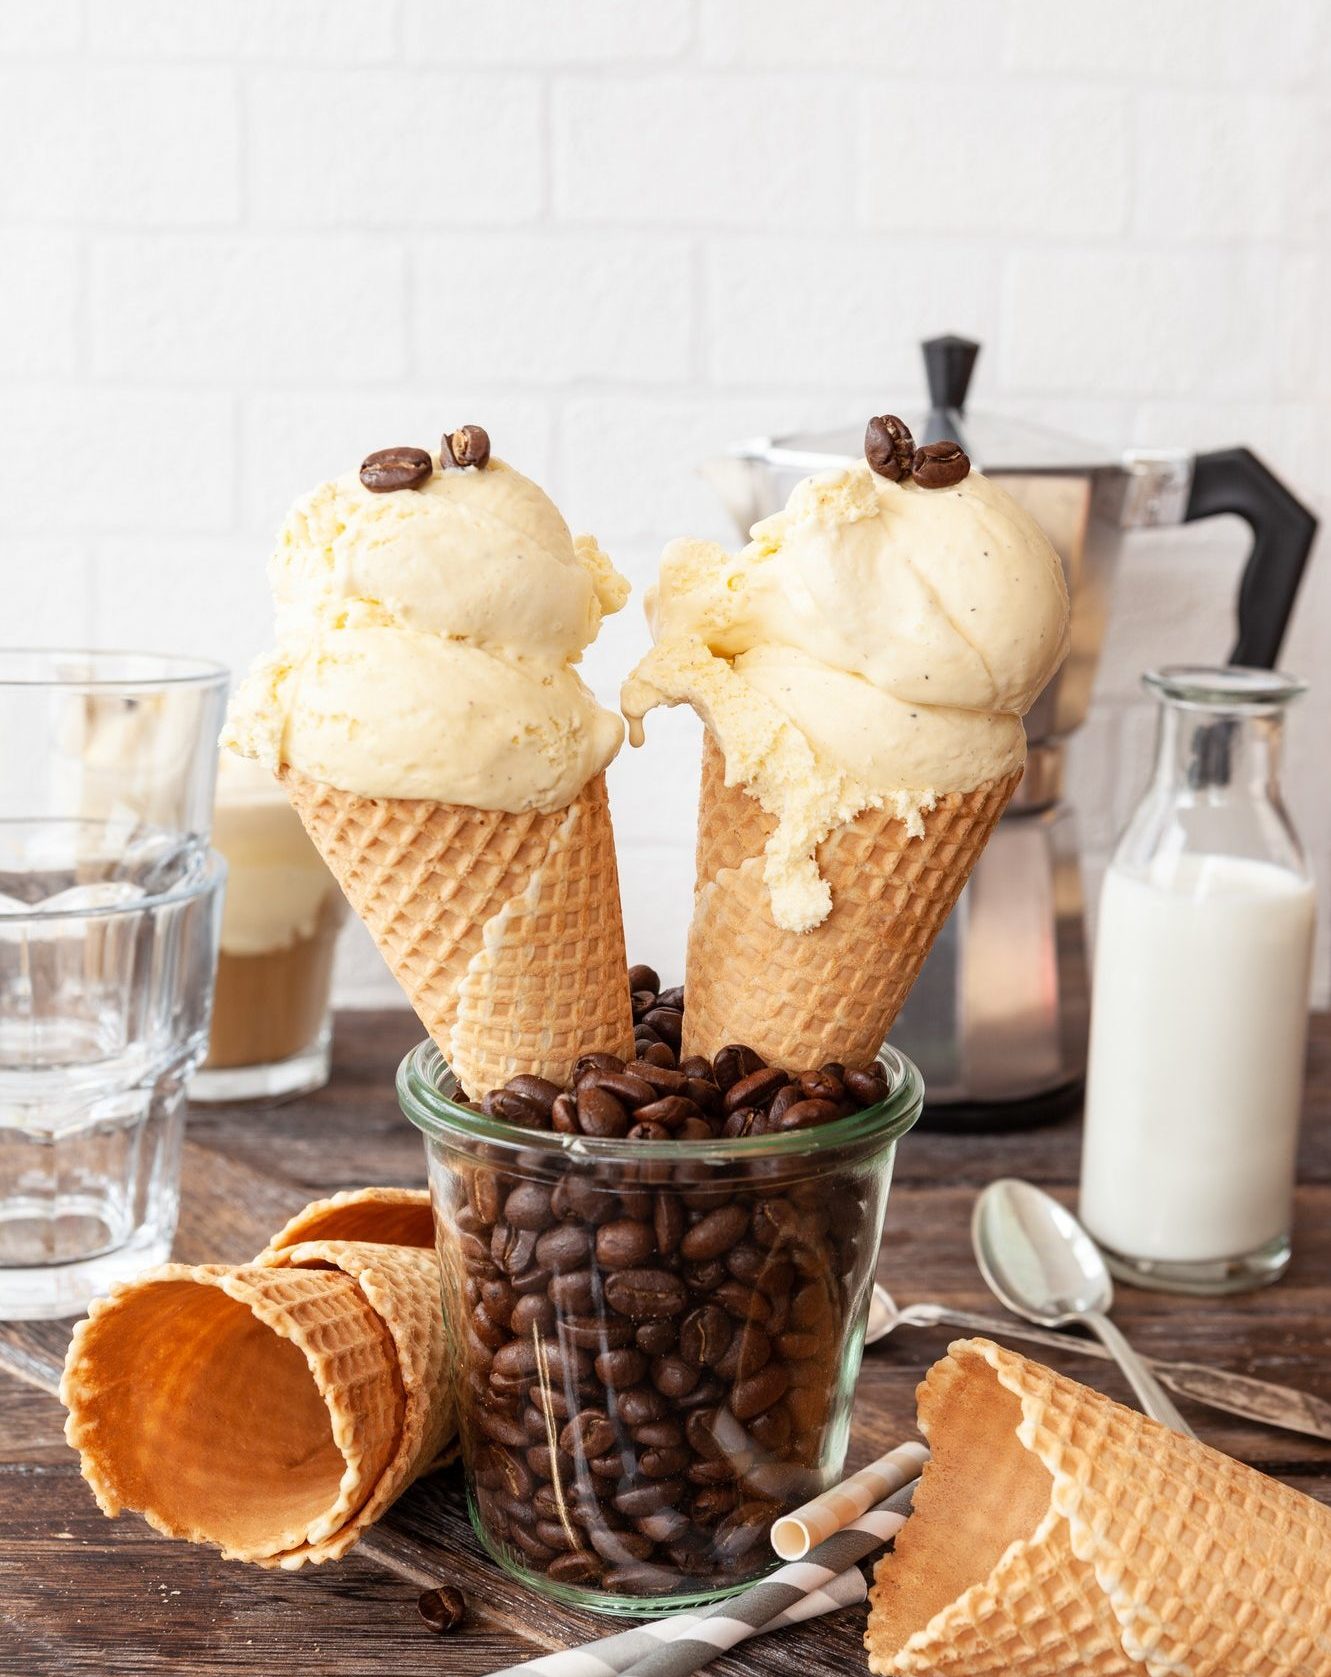 Scoops of ice cream in waffle cones